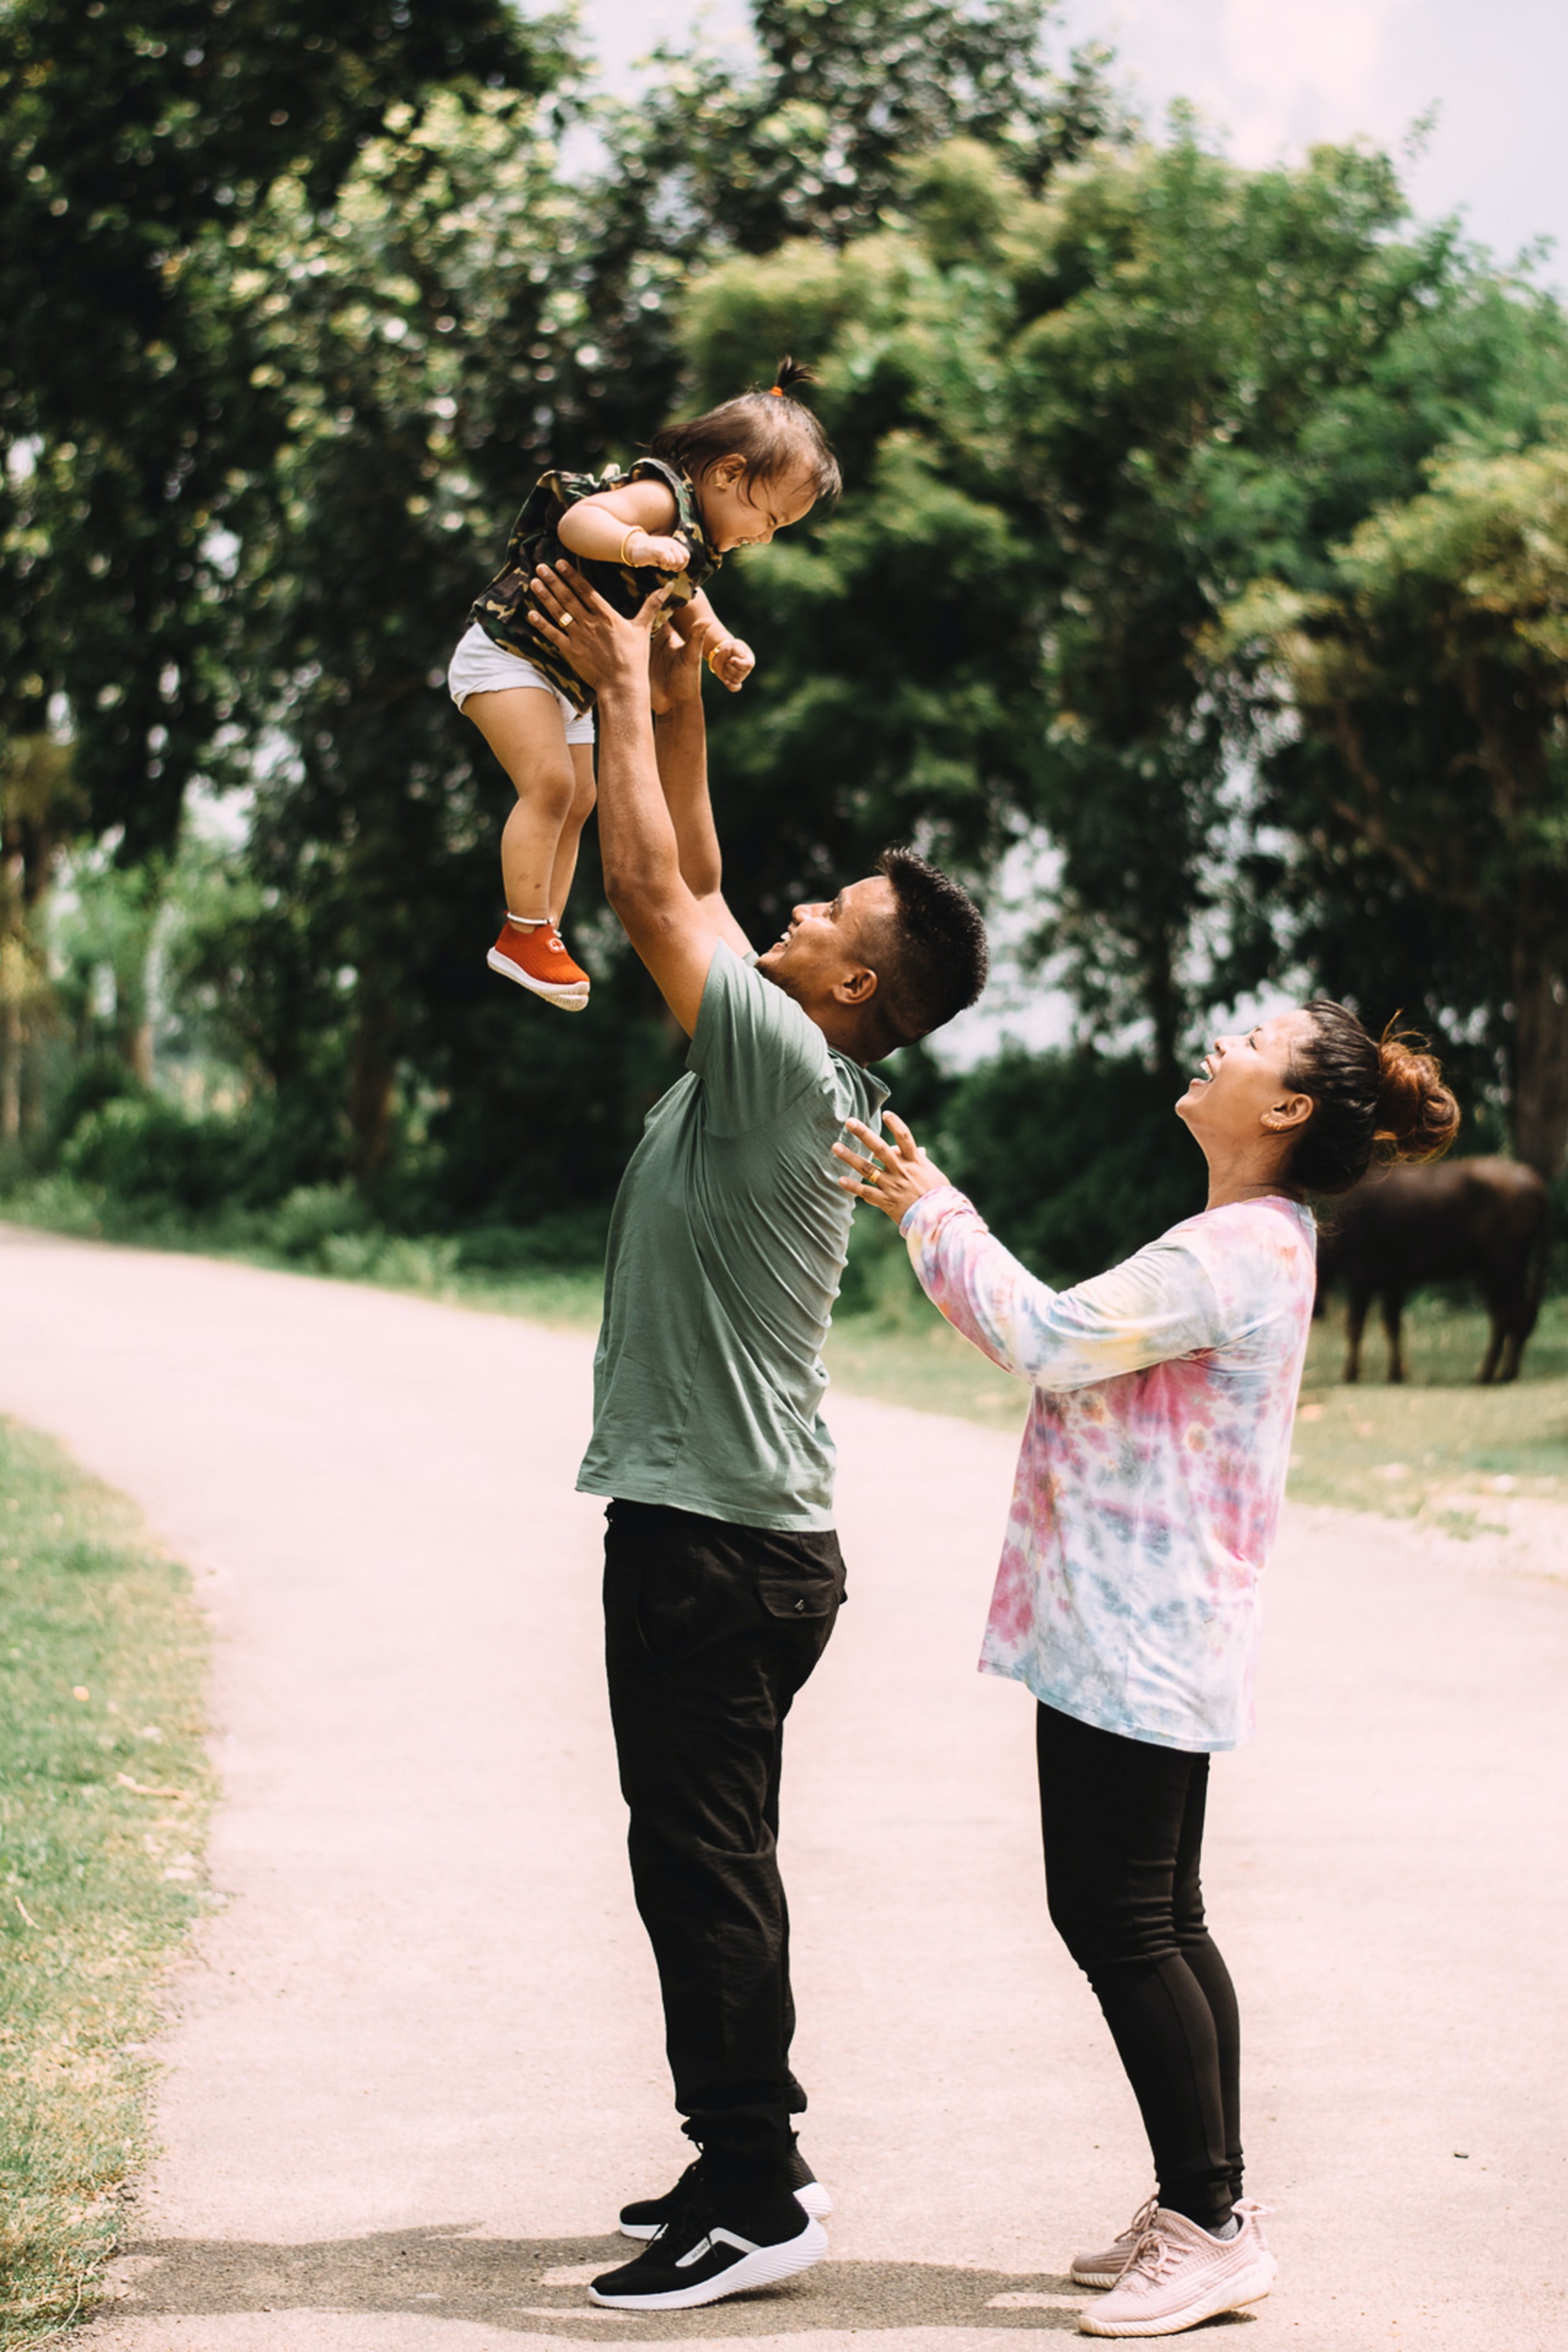 When considering adoption, many expectant parents ask "when can I choose a family?" This article hopes to answer that and many other queries.